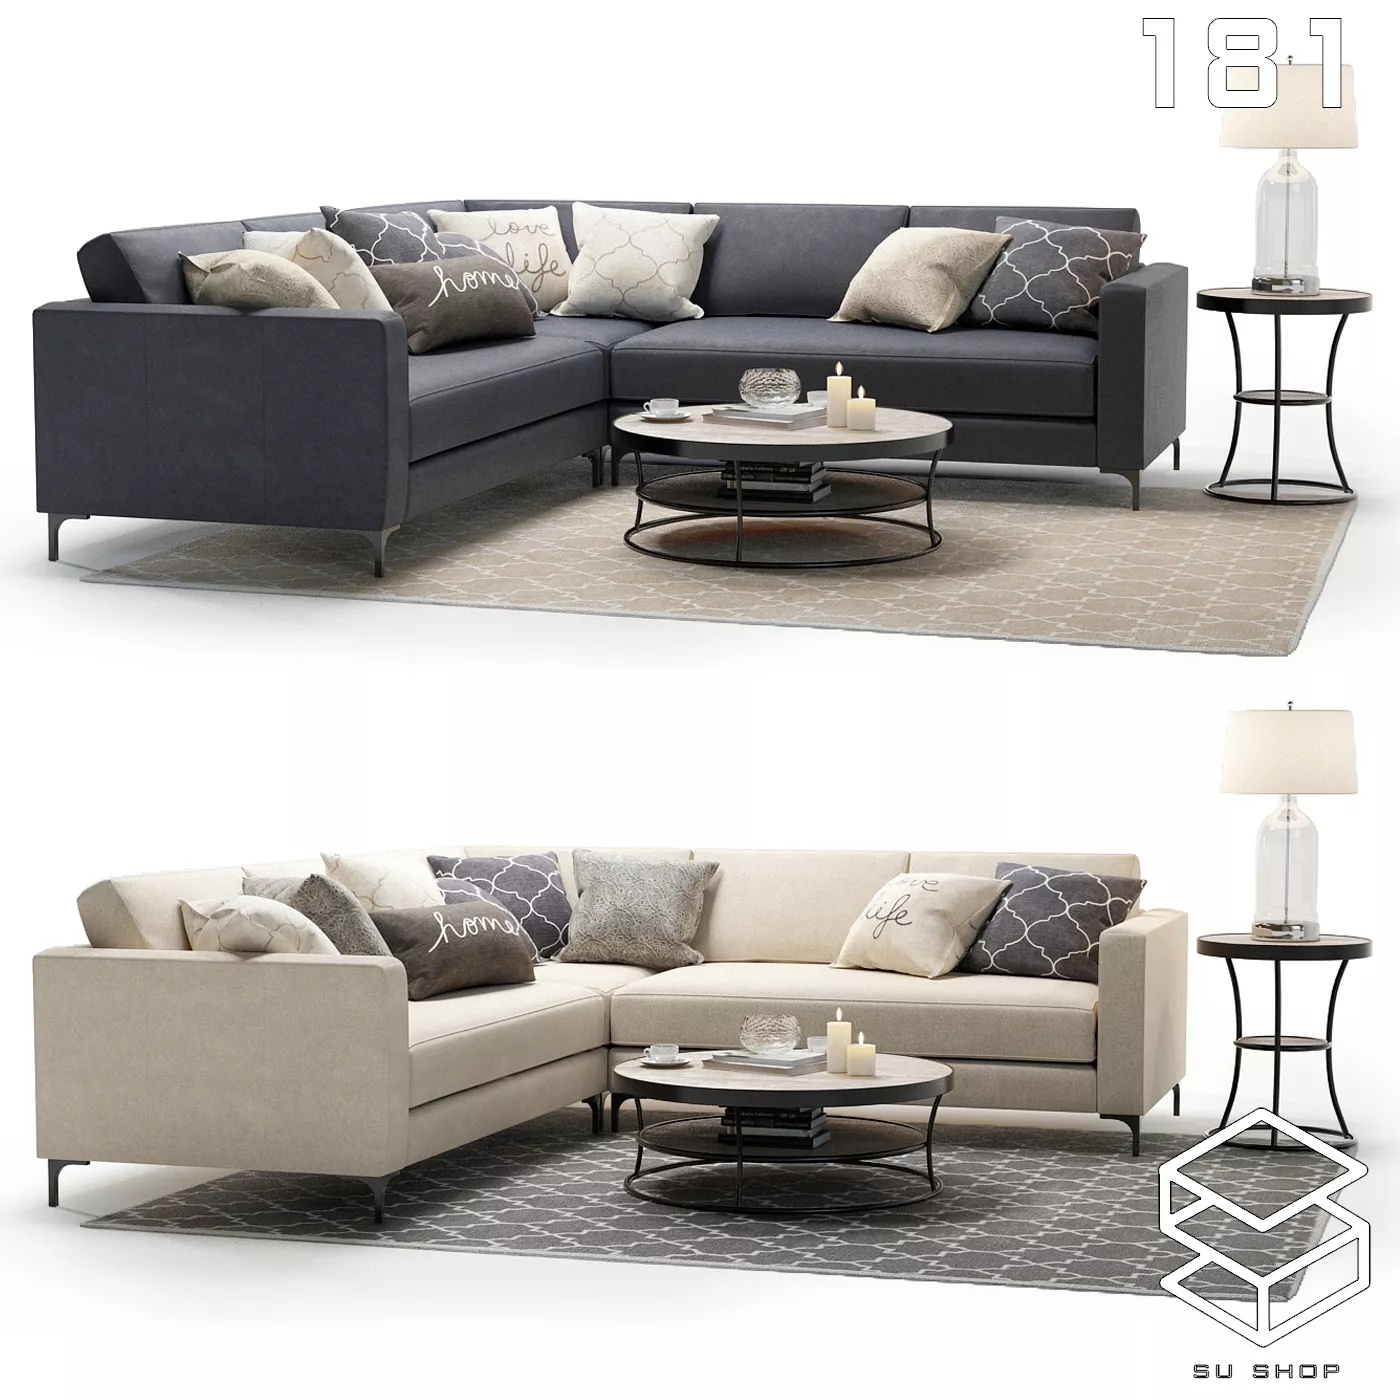 MODERN SOFA - SKETCHUP 3D MODEL - VRAY OR ENSCAPE - ID13476